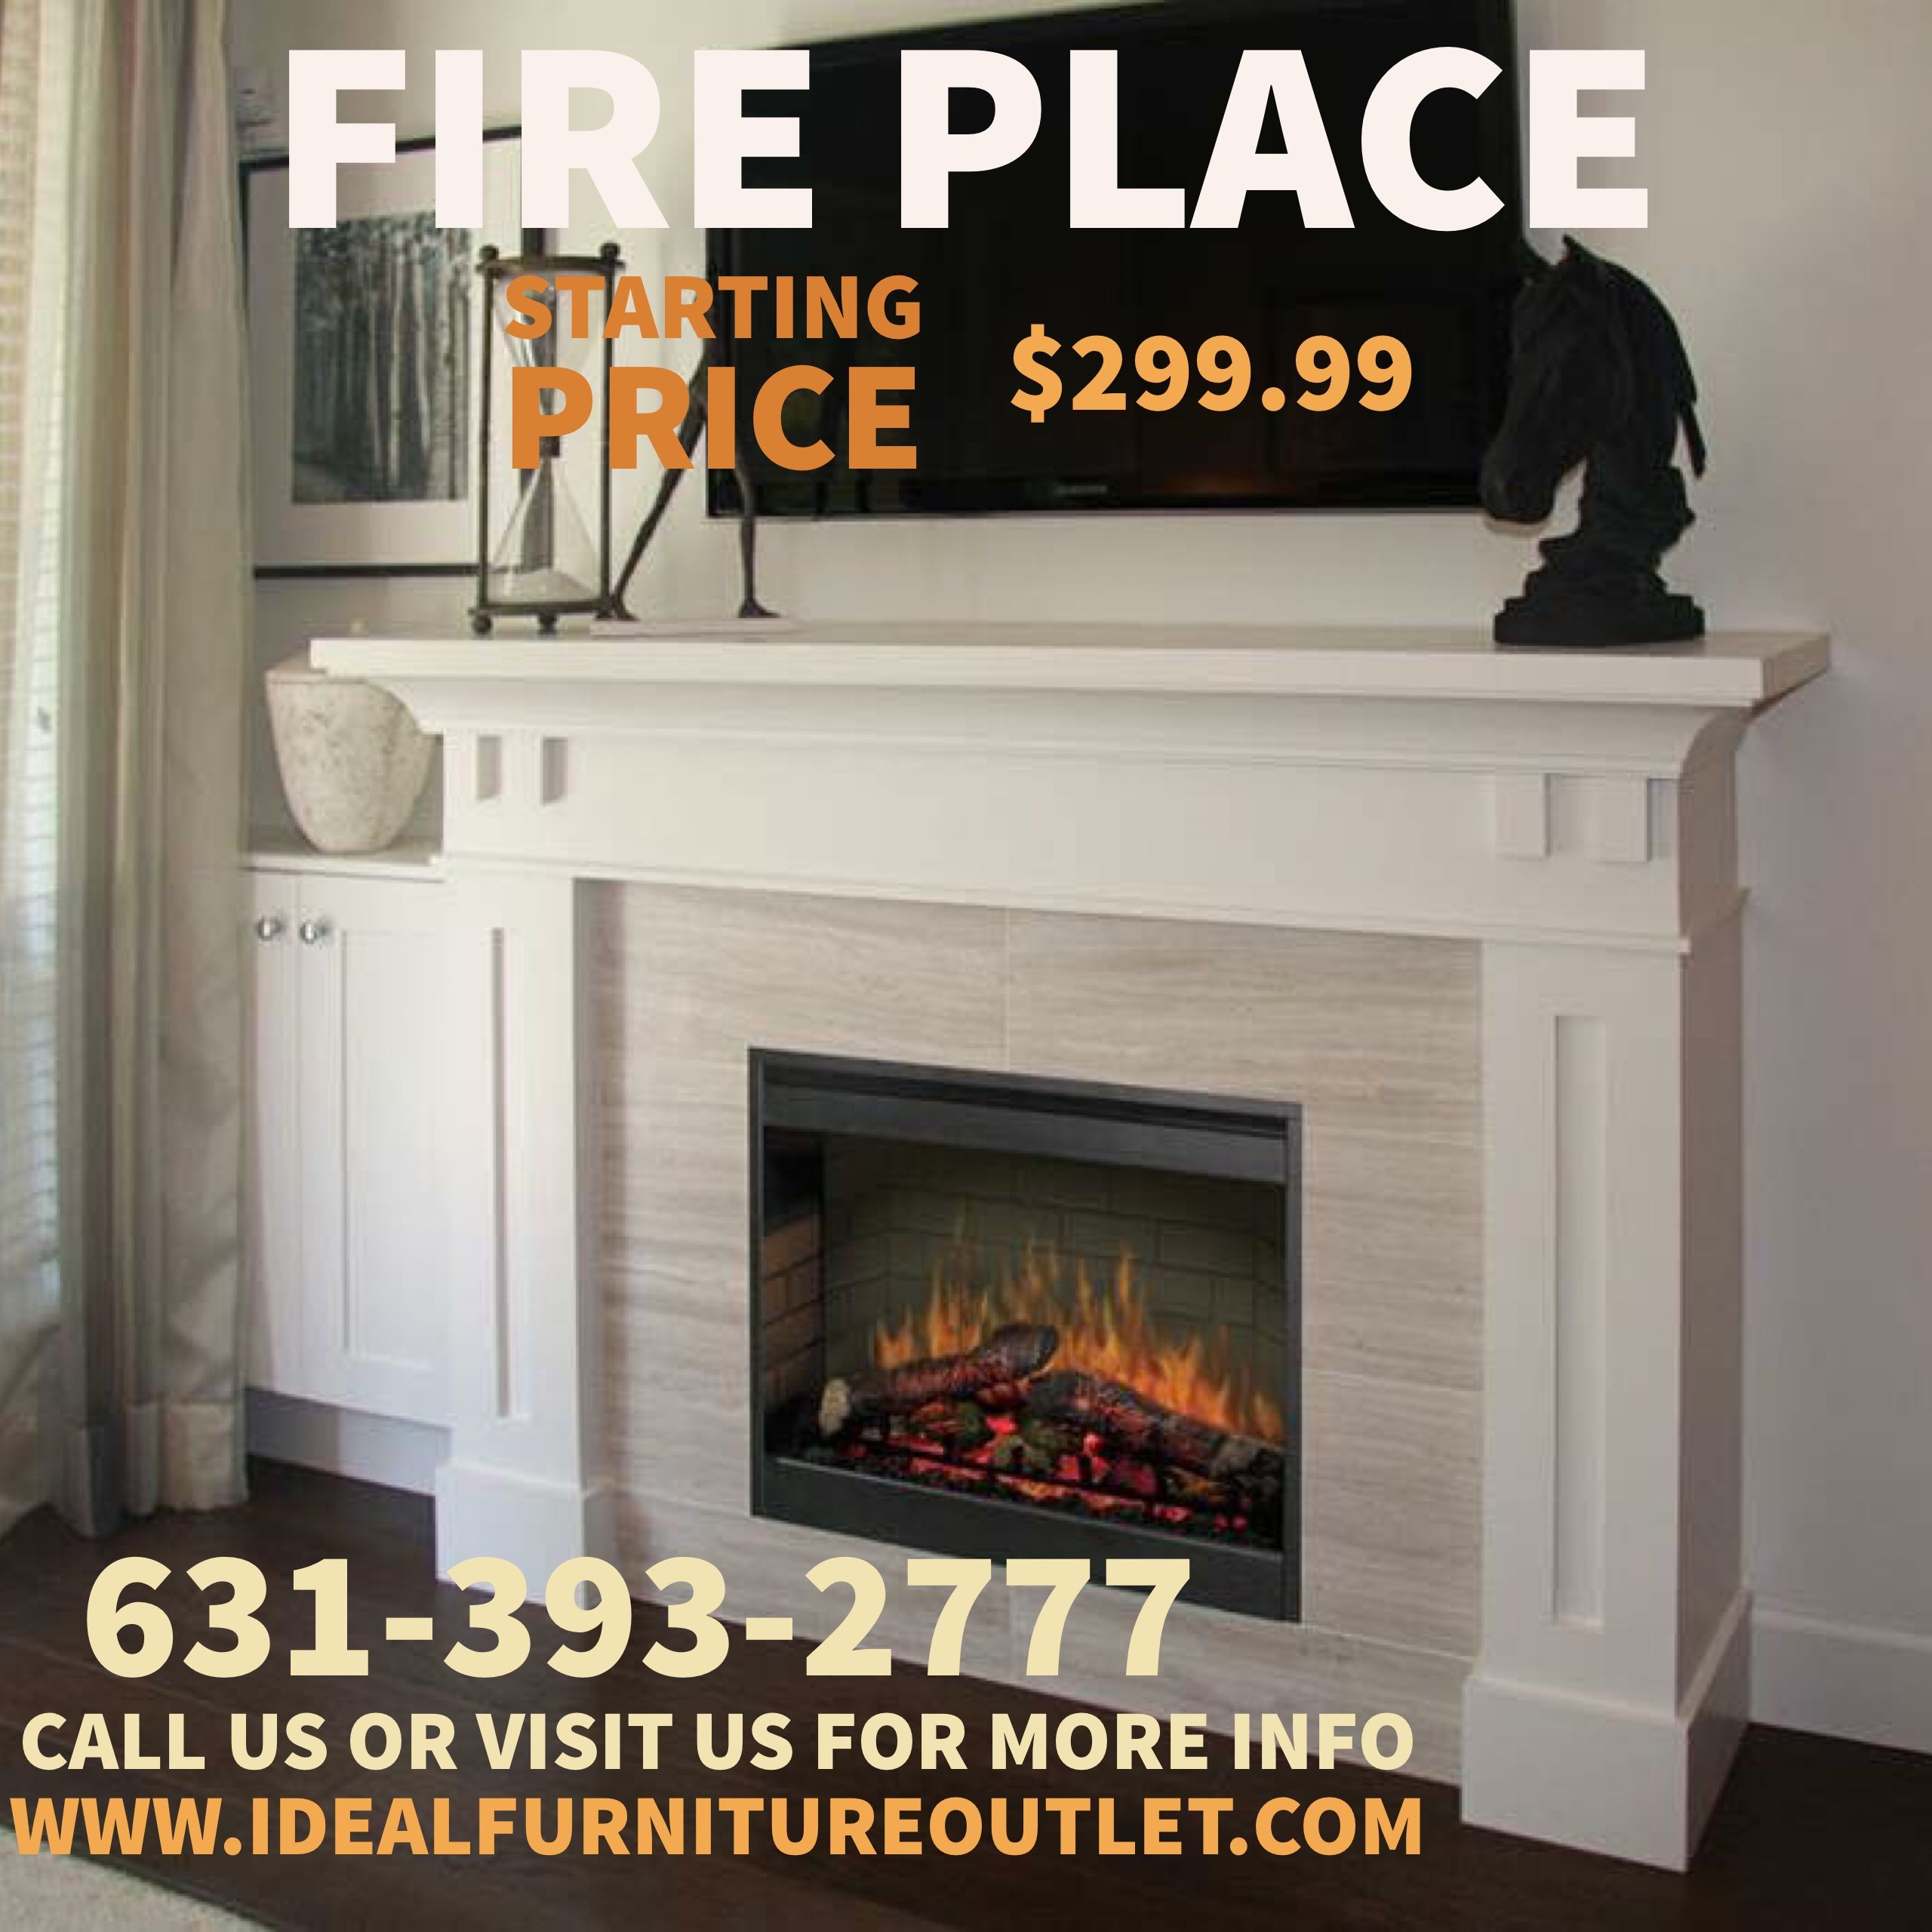 Raleigh Fireplace Awesome Ideal Furniture Gallery Idealfurnitureg On Pinterest